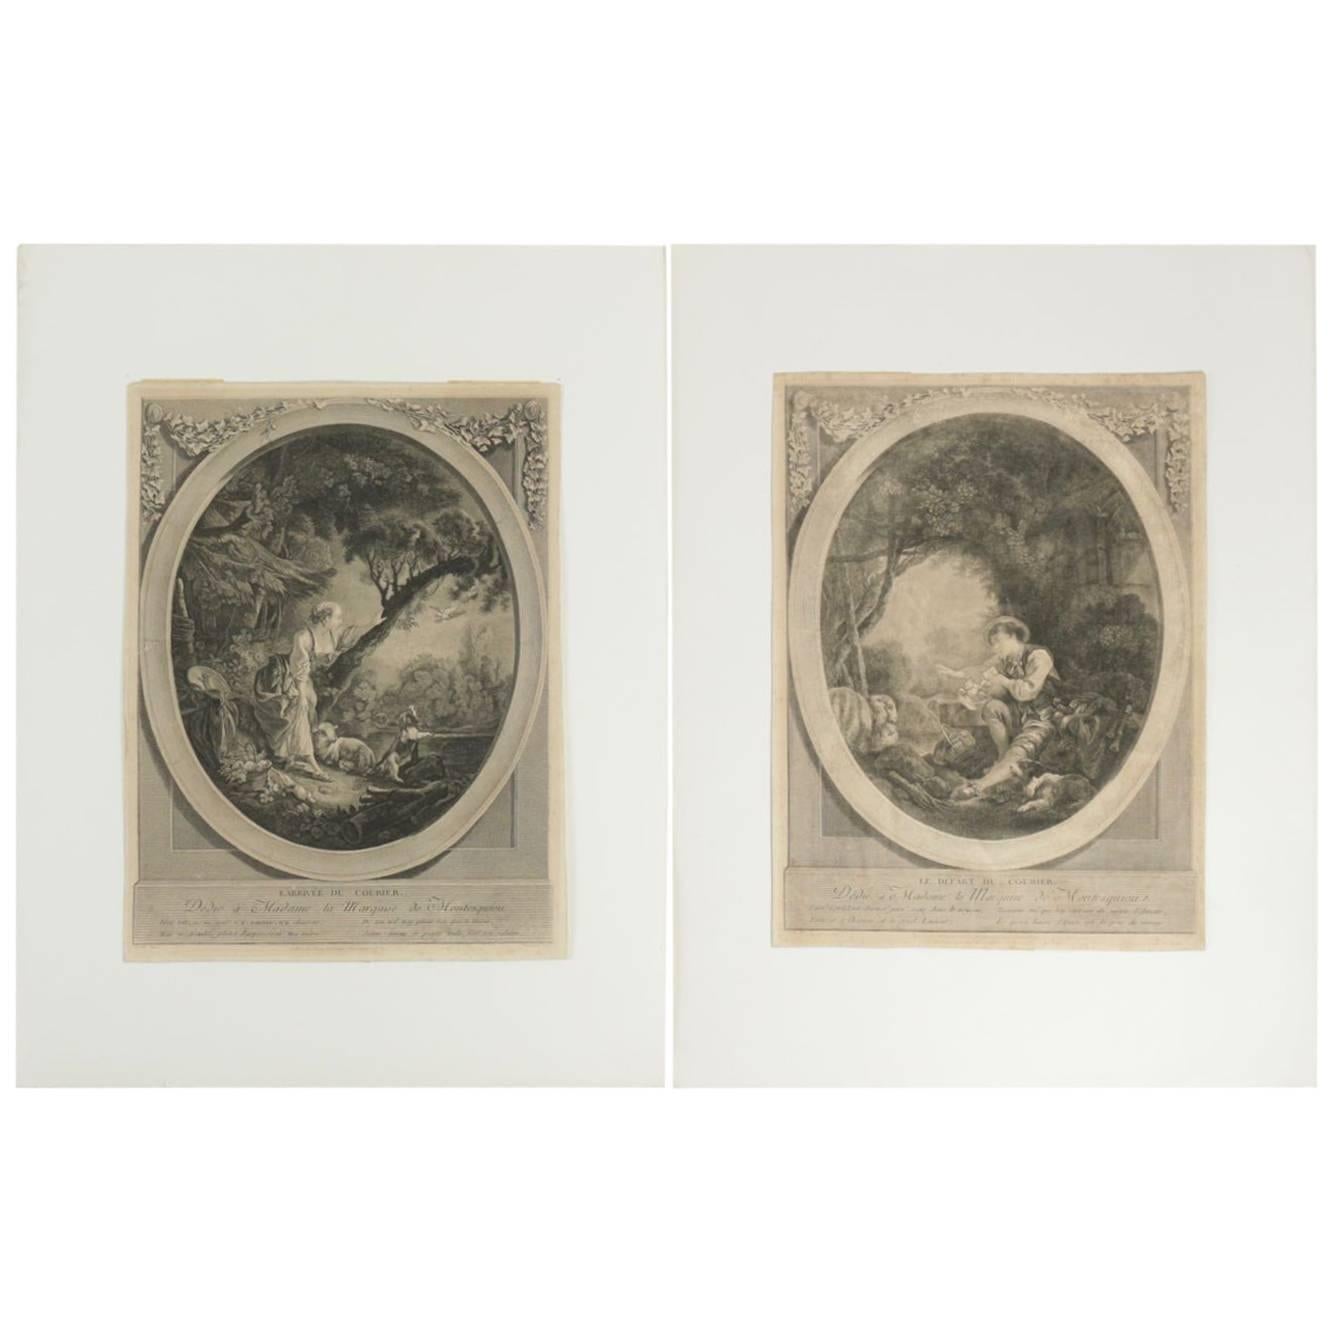 Pair of Steel Engraving from the 19th Century